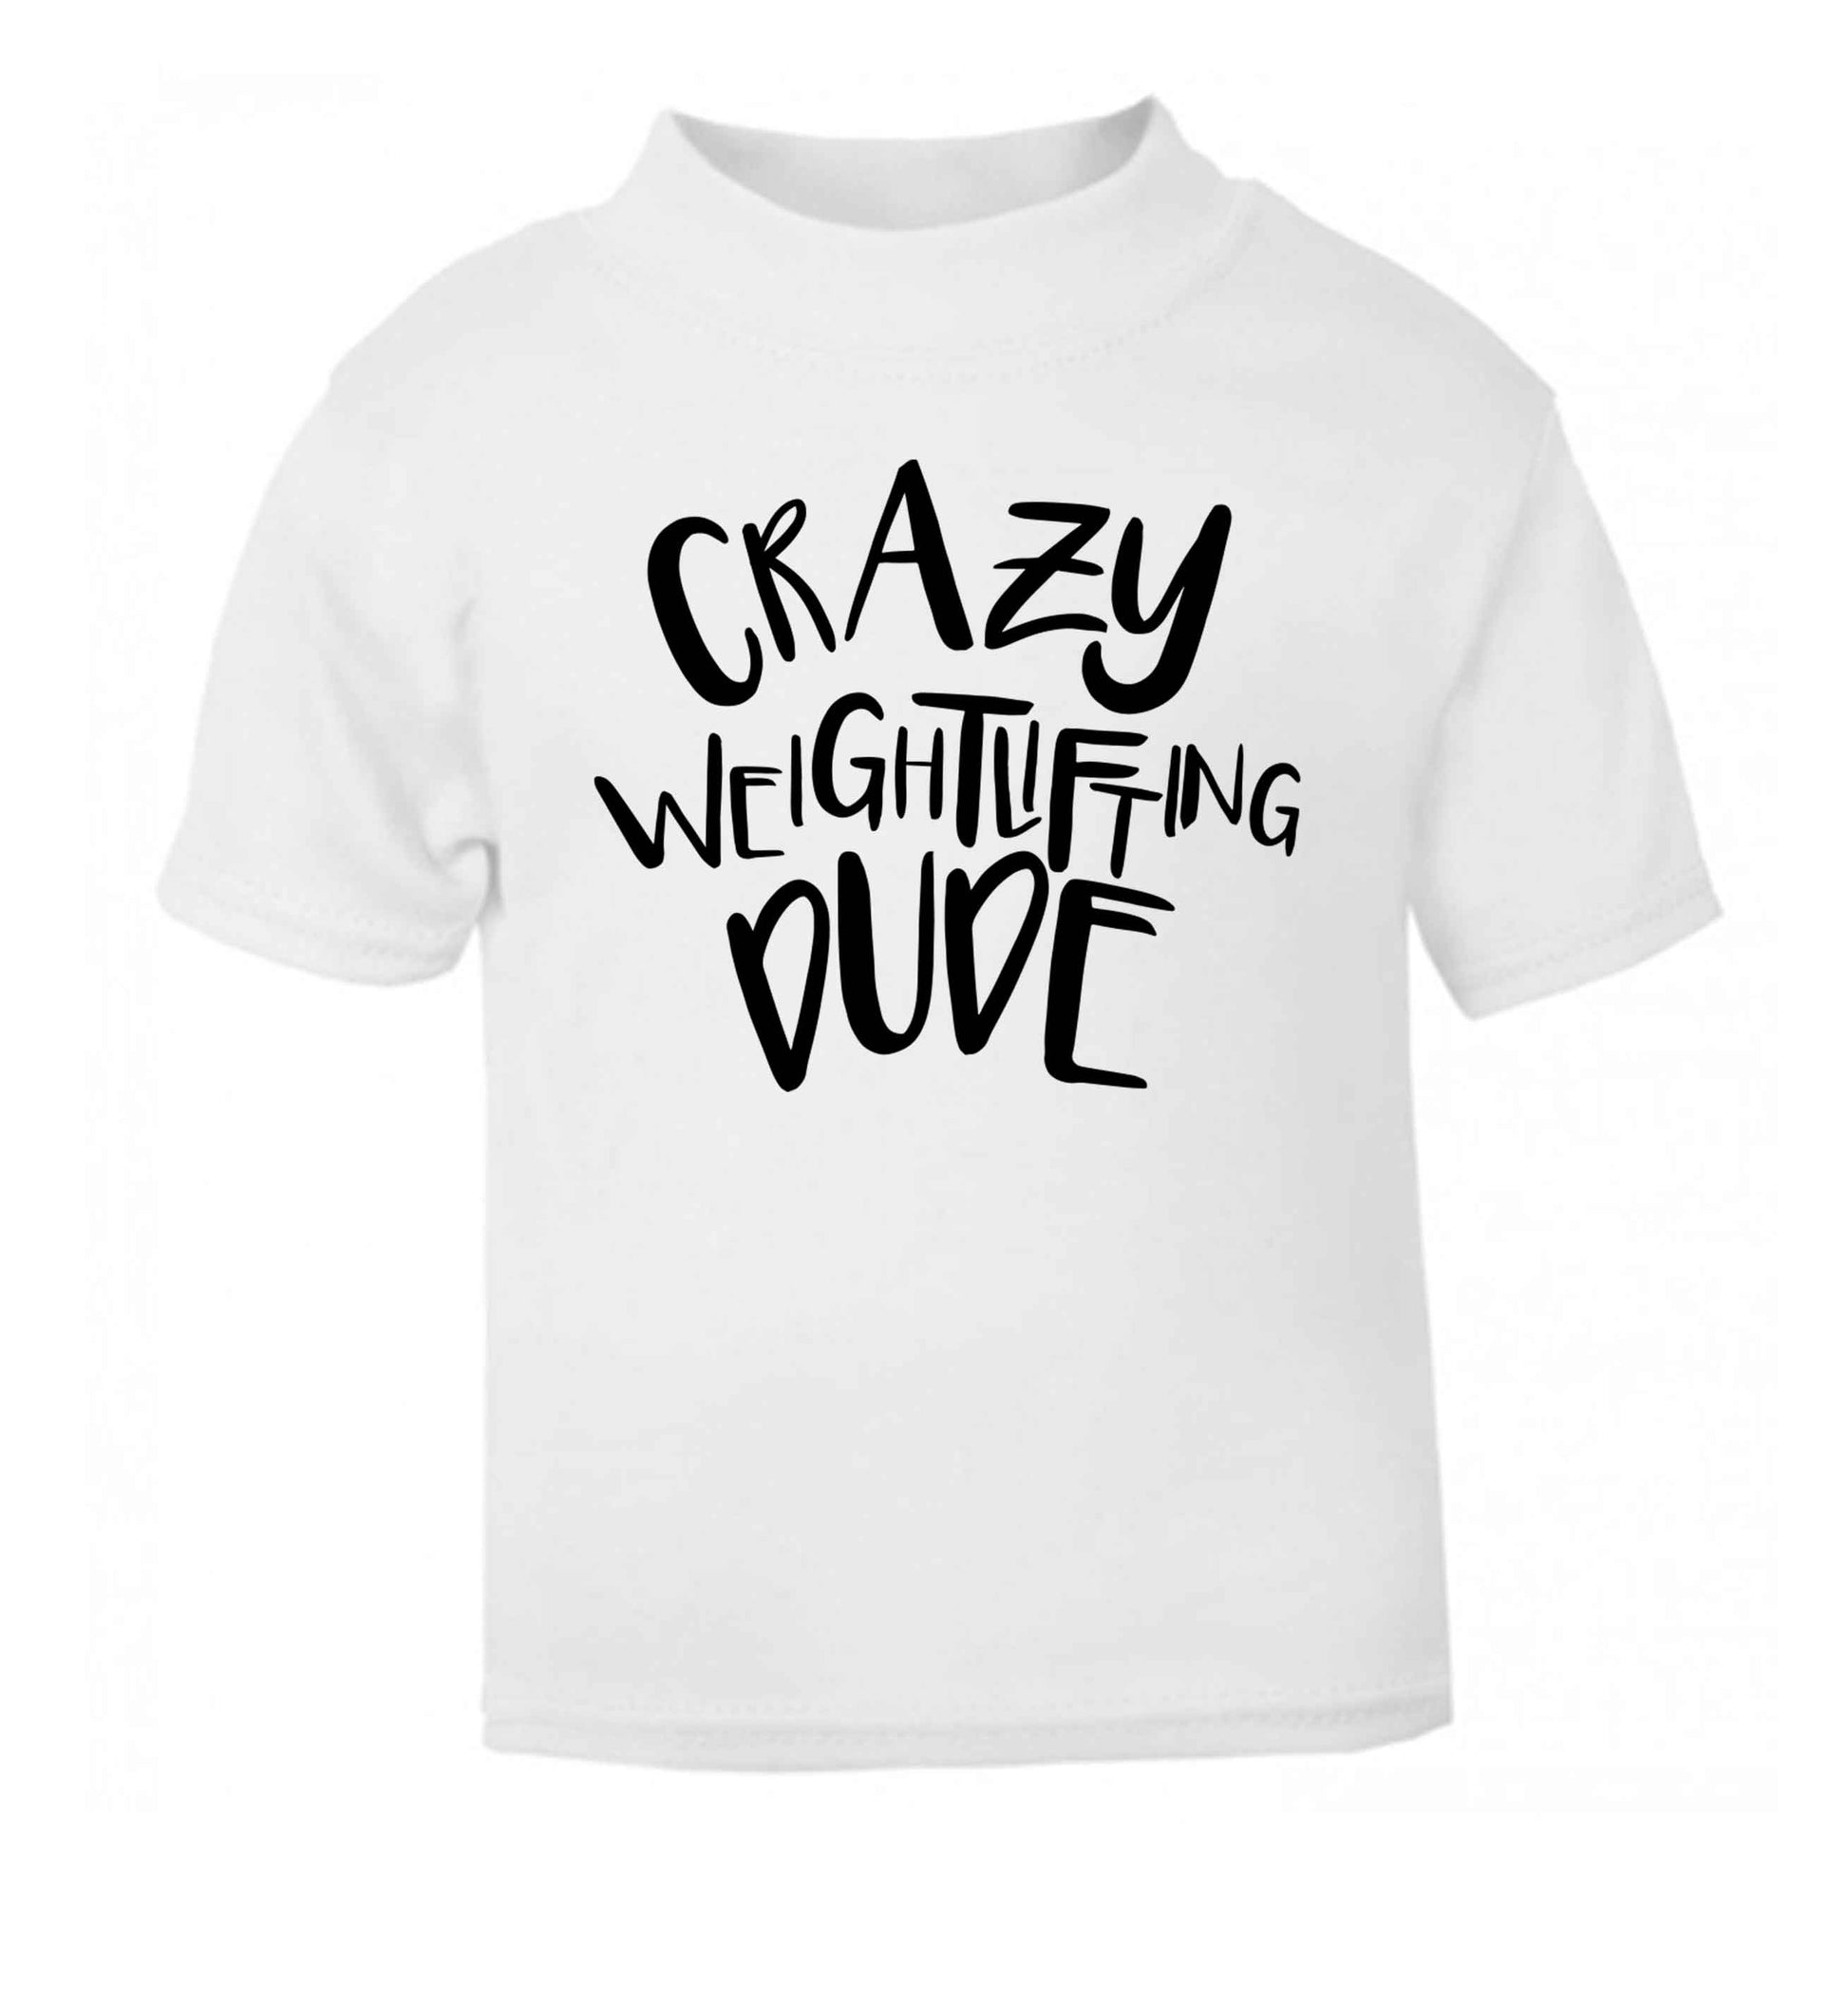 Crazy weightlifting dude white Baby Toddler Tshirt 2 Years